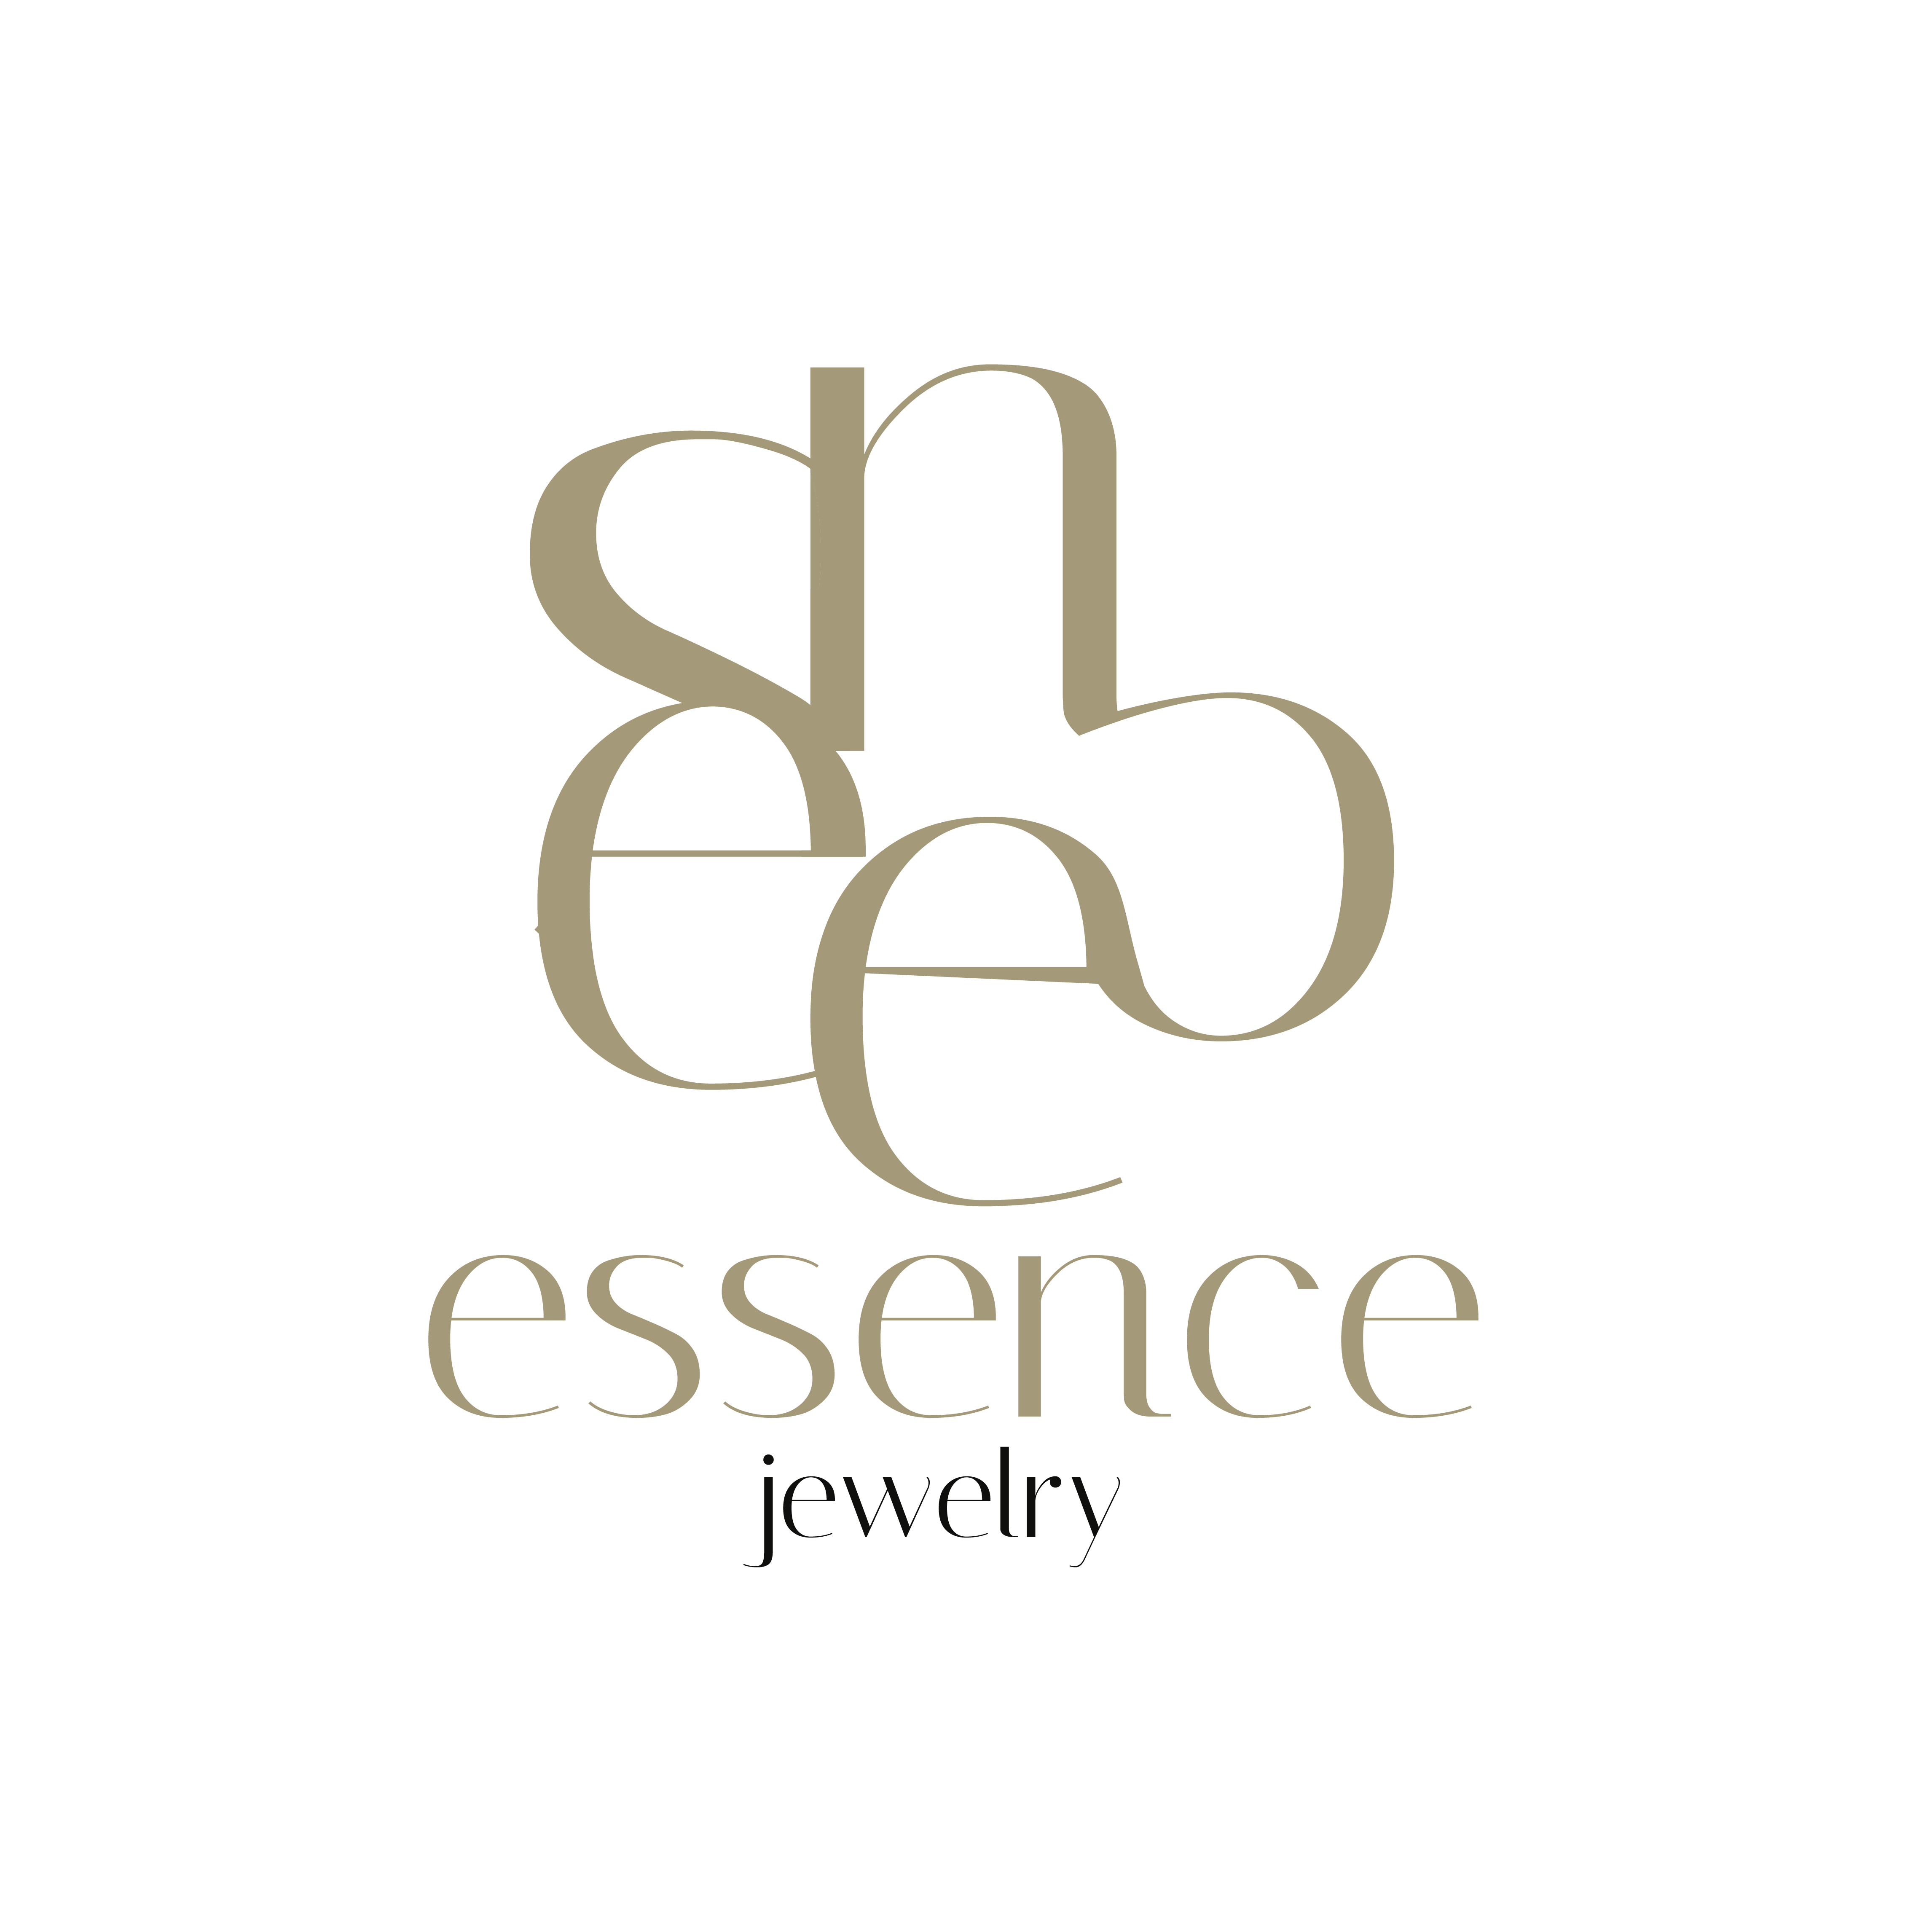 Essence jewerly logo preview image.